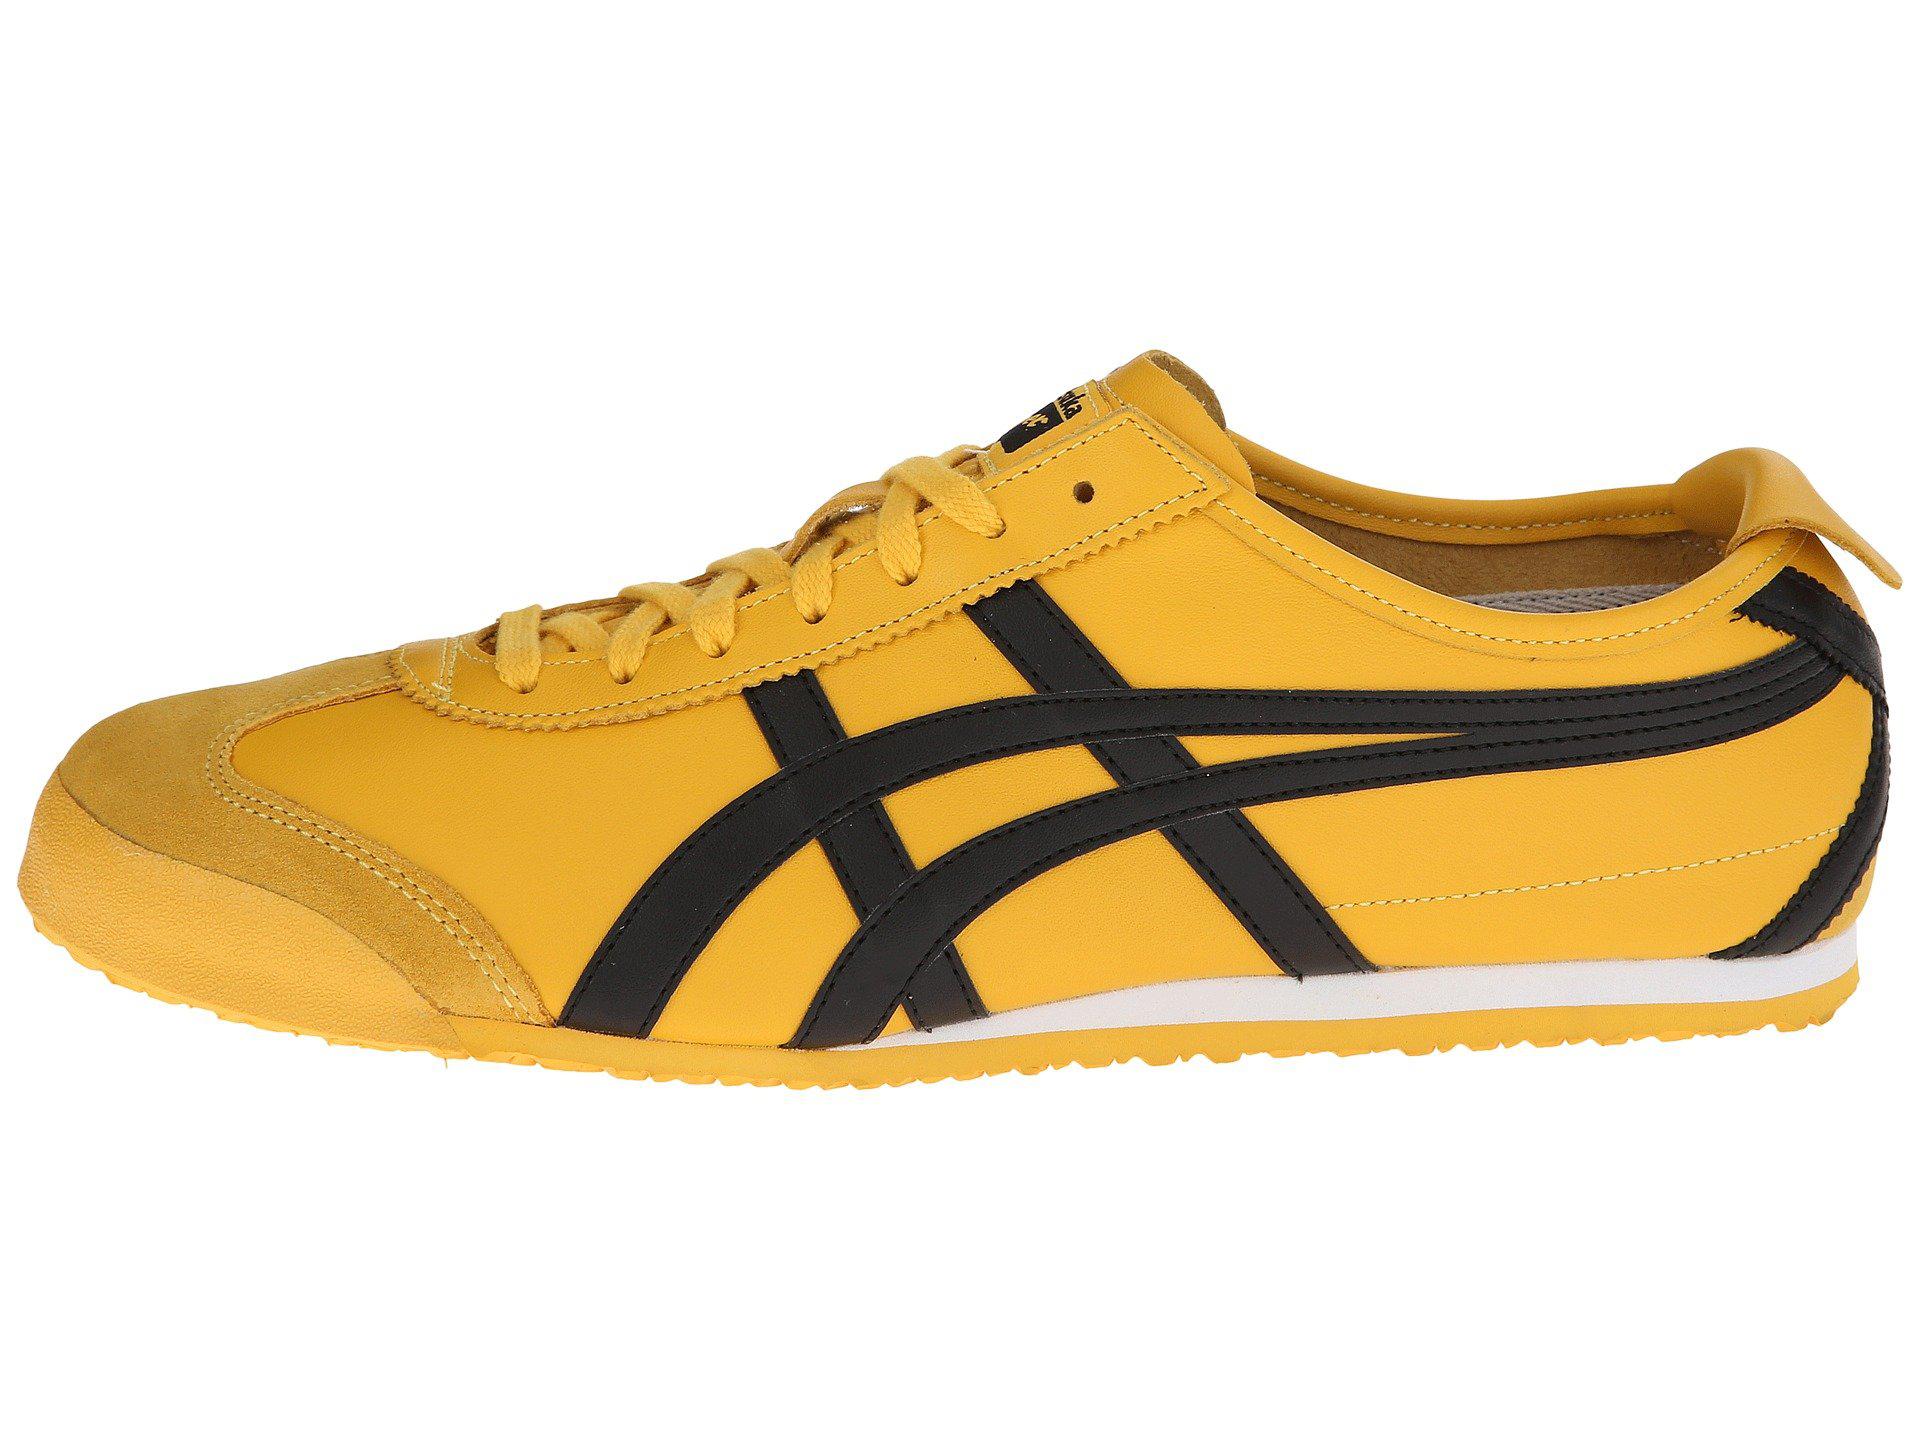 Lyst - Asics Mexico 66® in Yellow